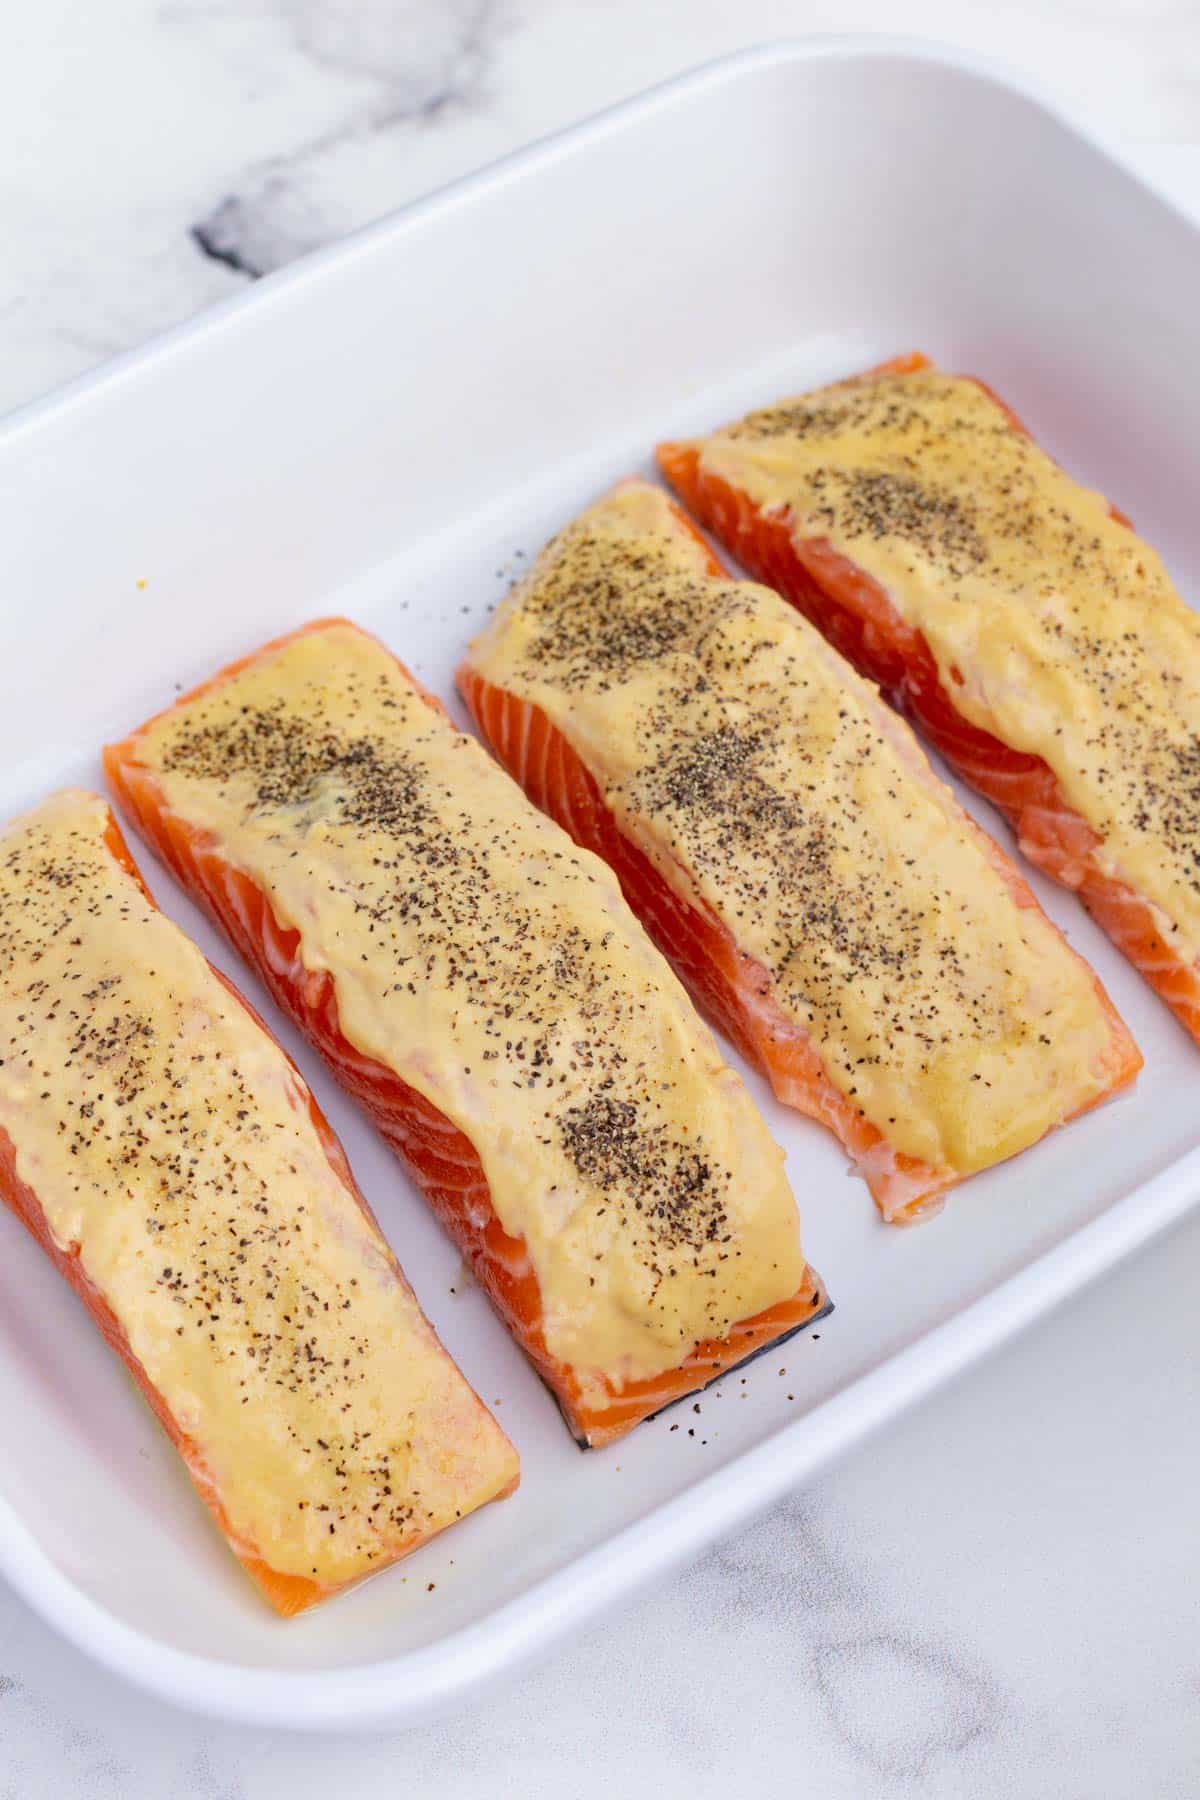 Salt and pepper is sprinkled over the salmon.